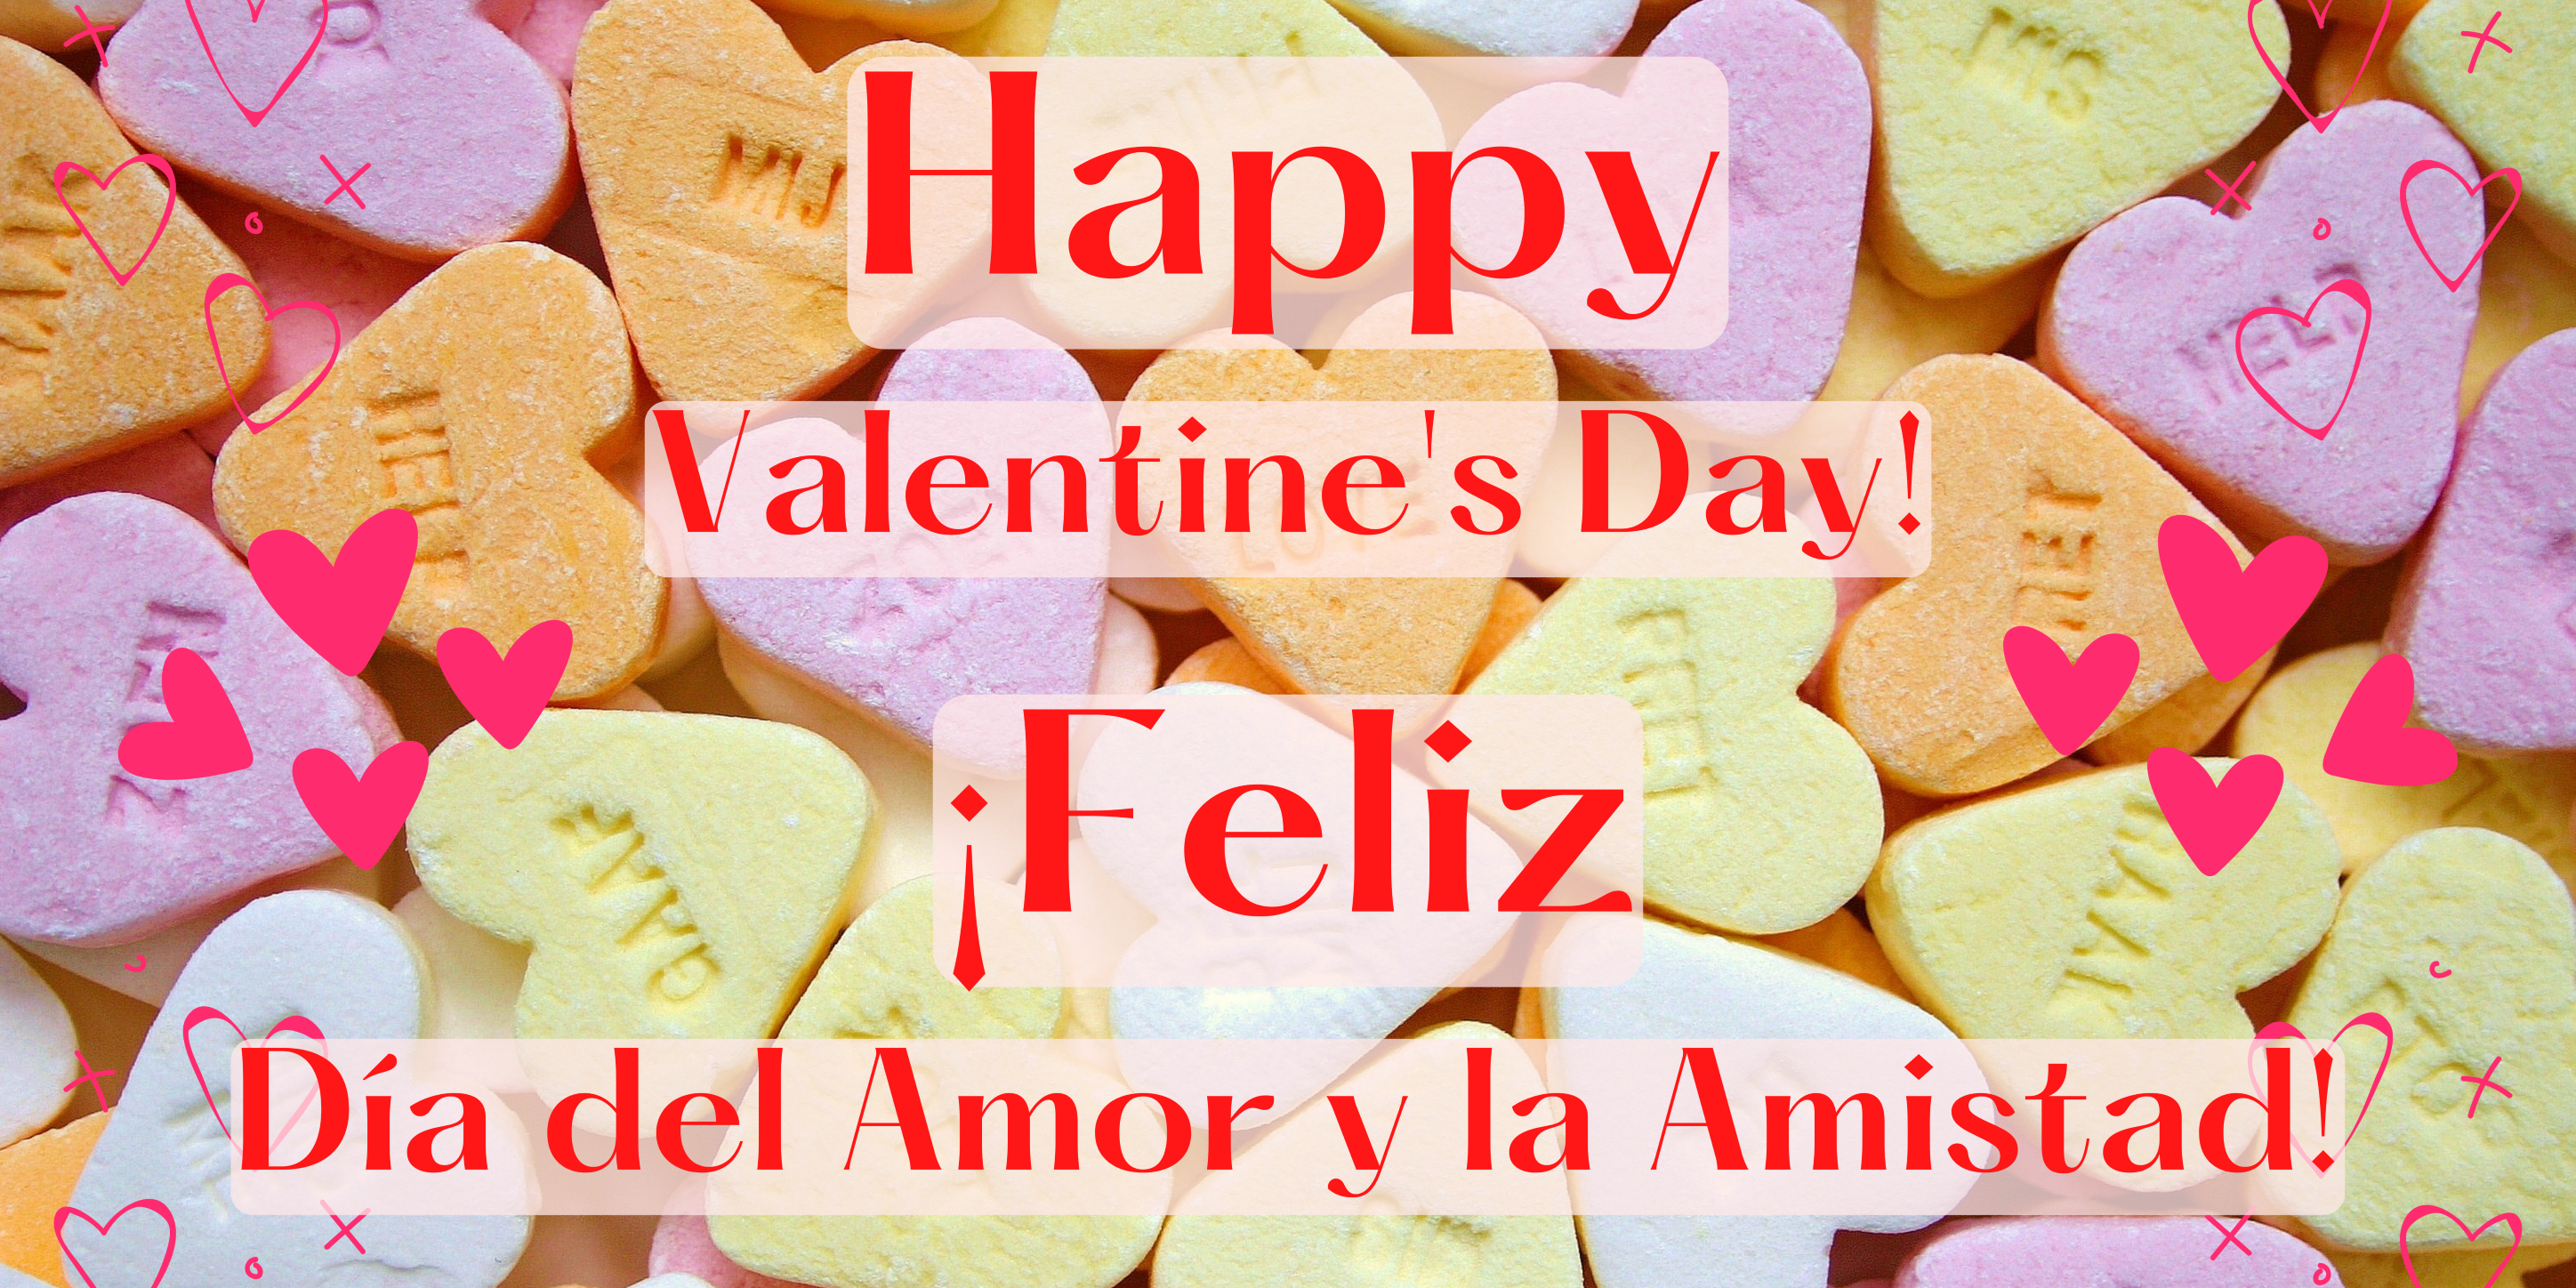 Red text on background with multicolored candy hearts. Text says, "Happy Valentine's Day" and "¡Feliz Día del Amor y la Amistad!"